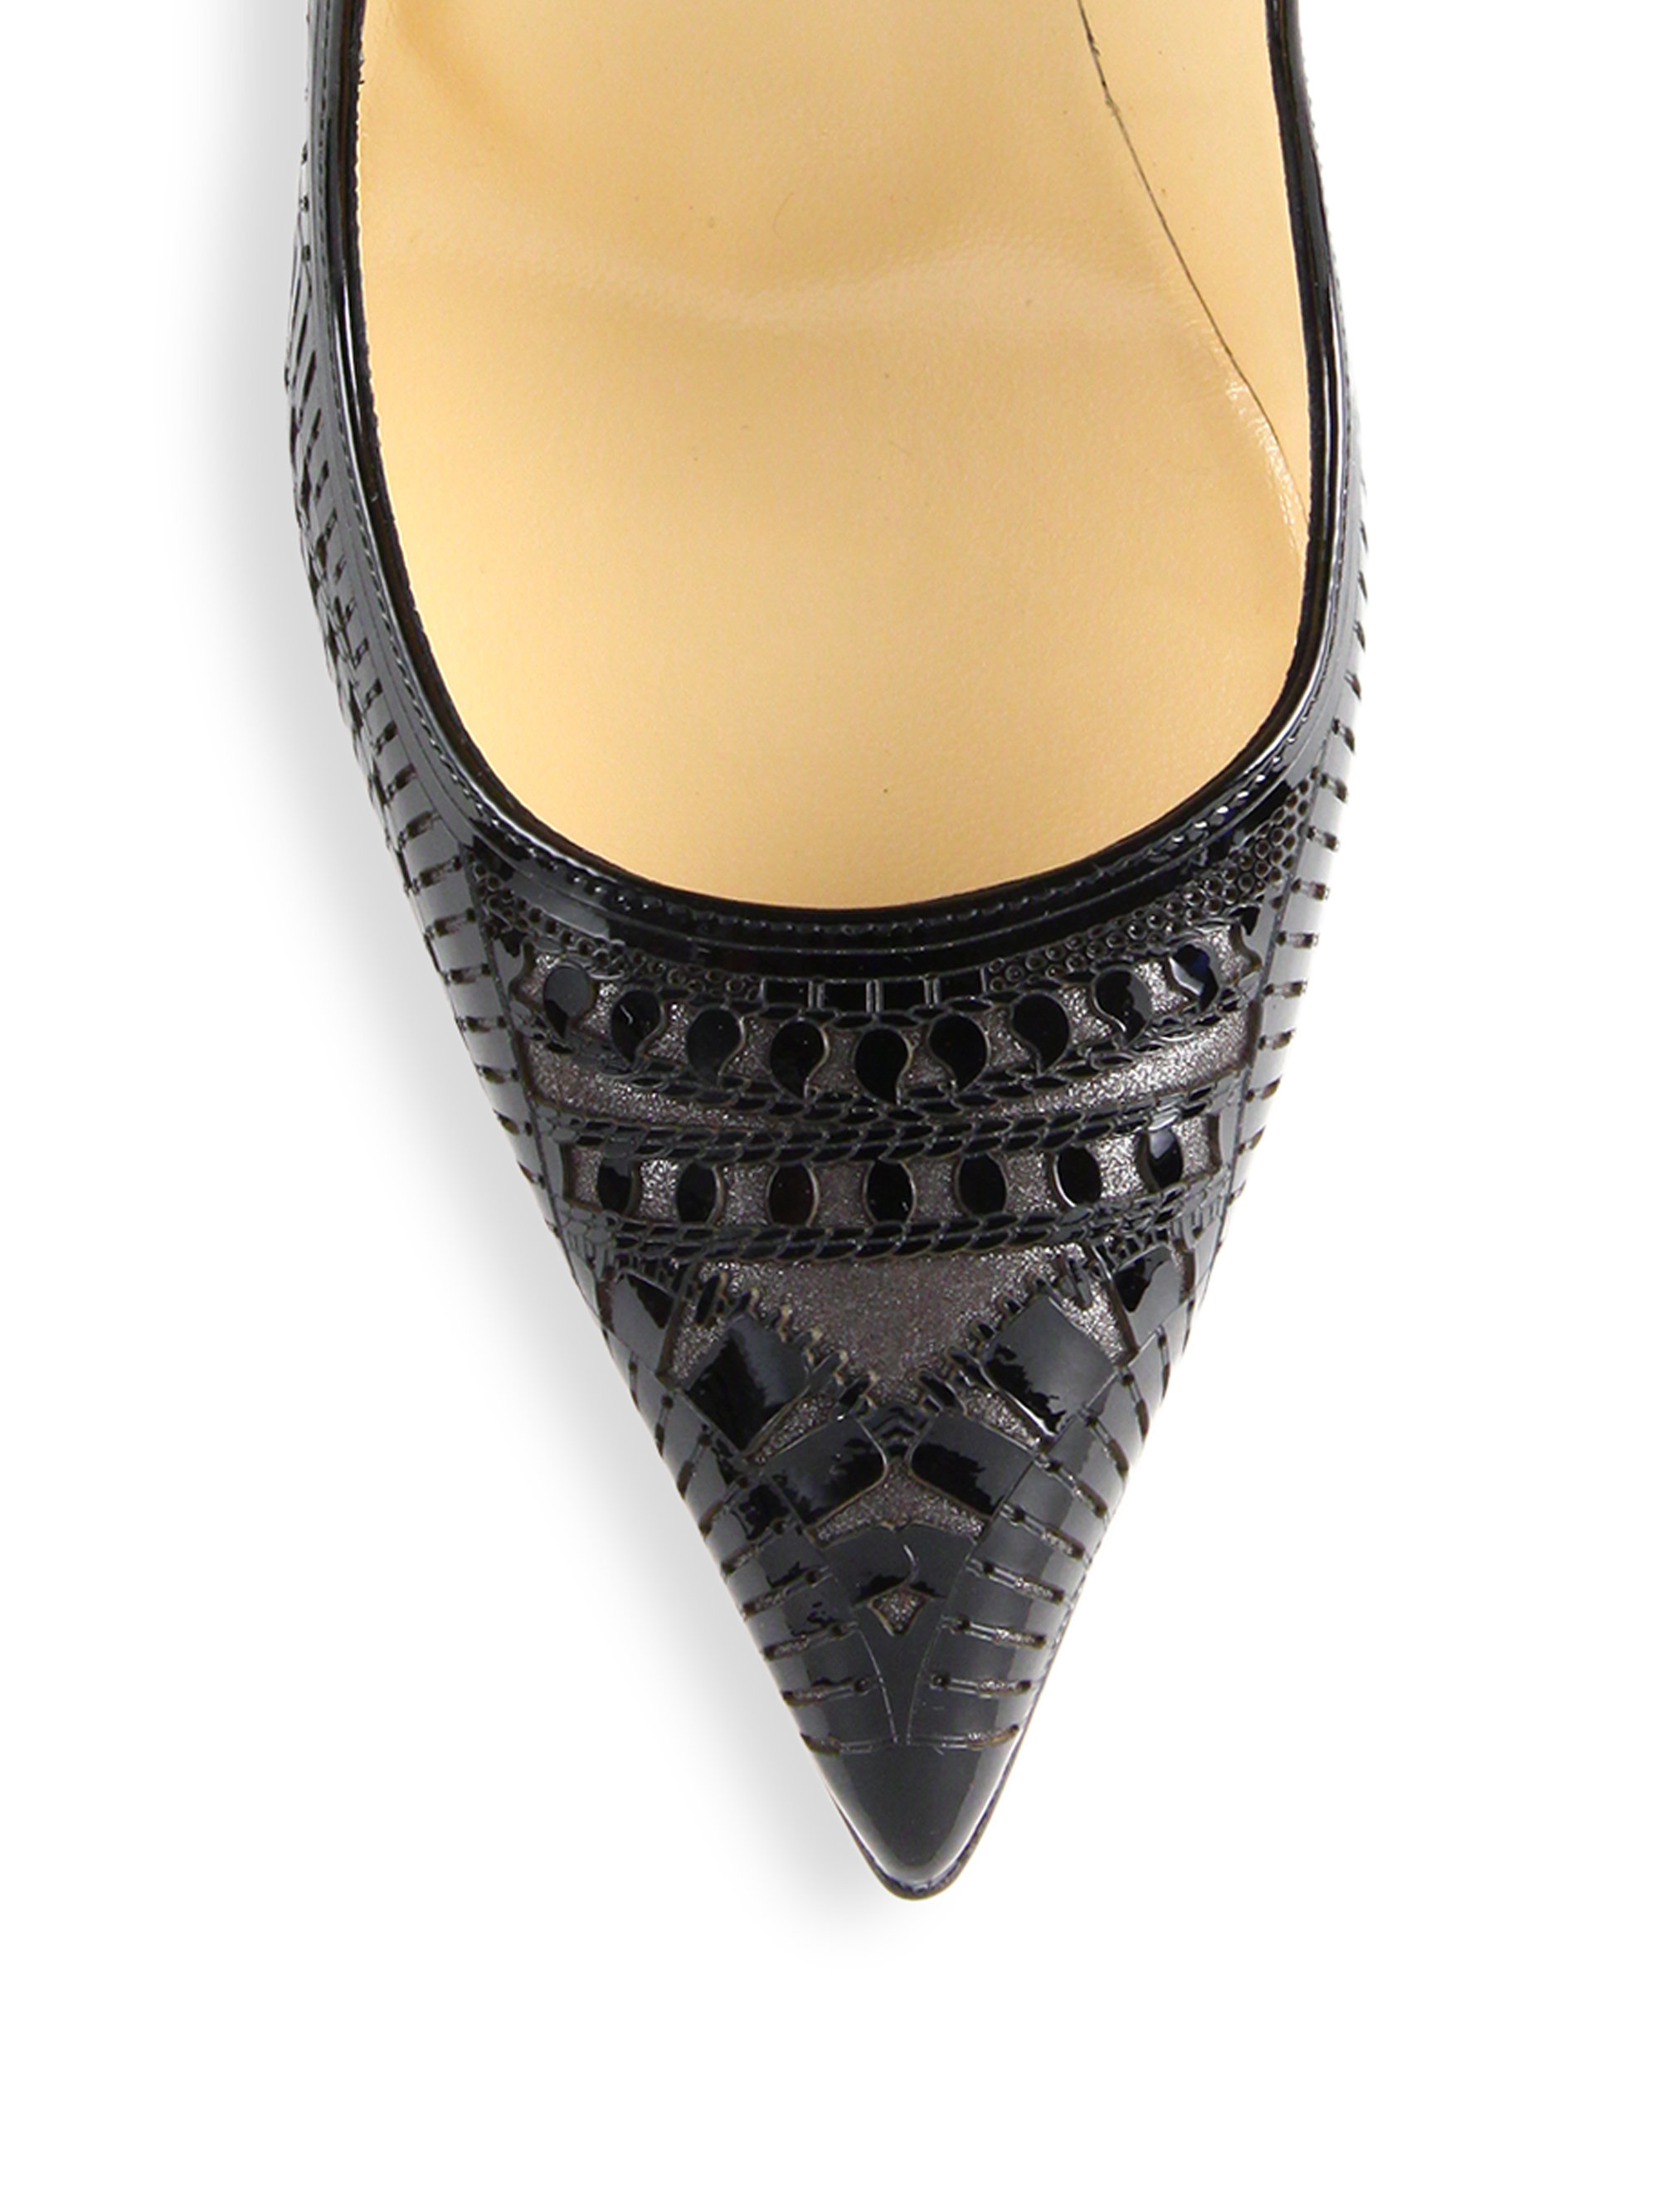 louboutin shoes price - Christian louboutin Kristali Laser-Cut Leather Pumps in Black | Lyst